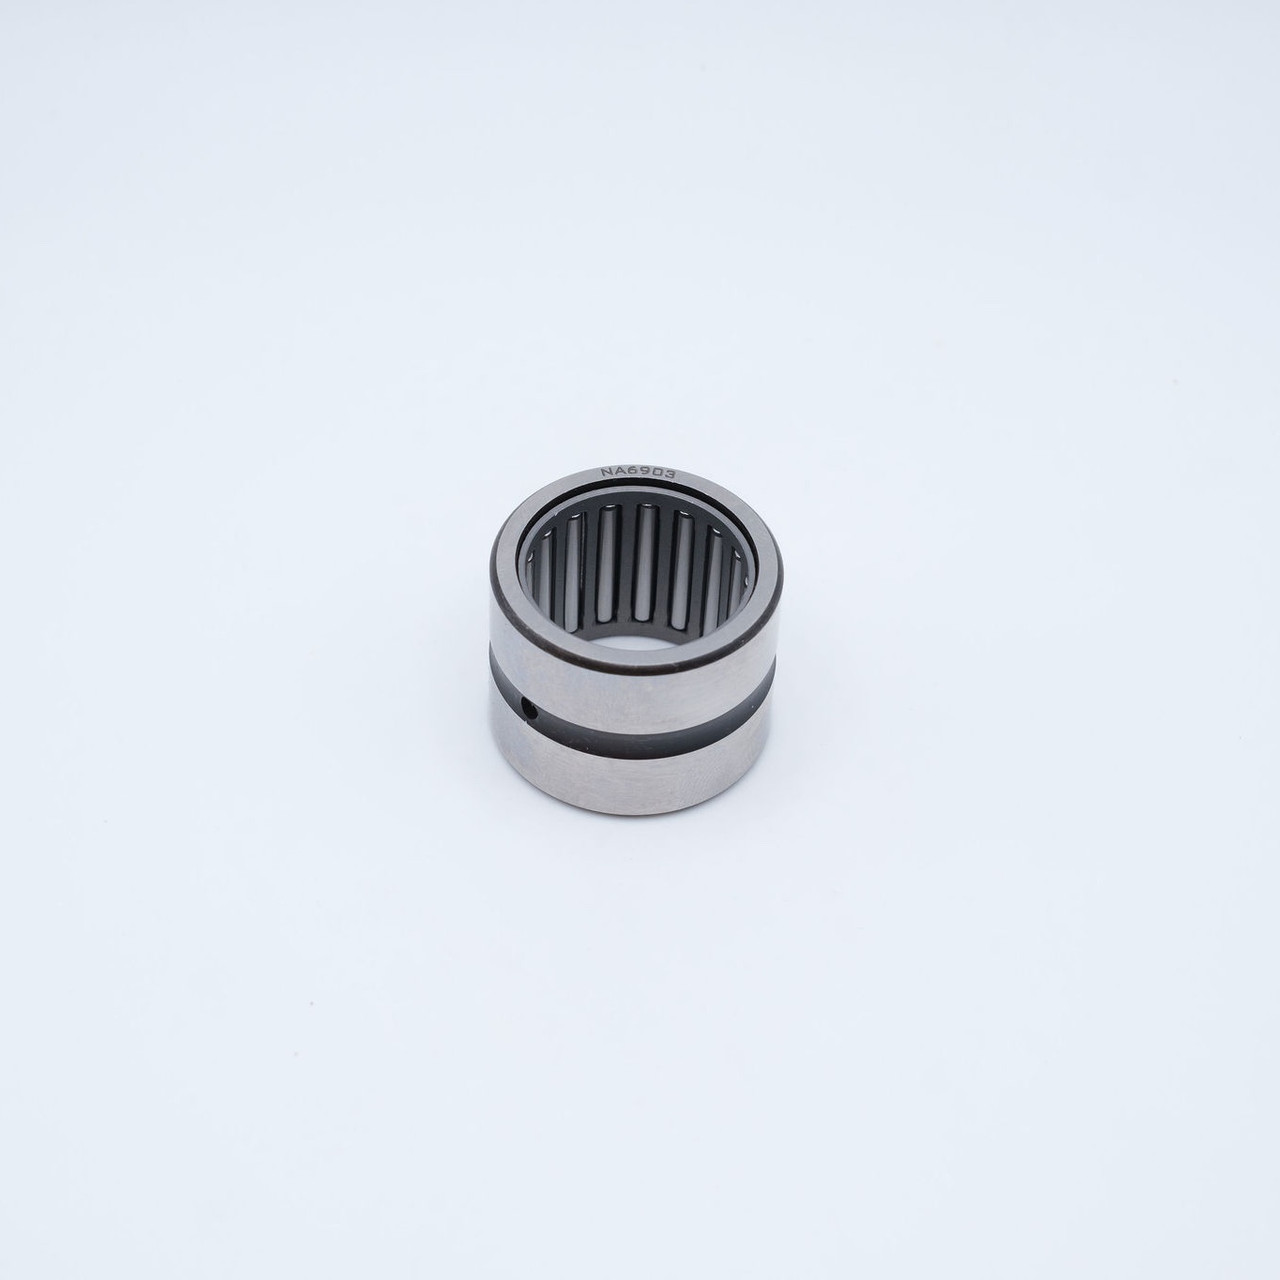 RNA6902 Machined Needle Roller 20x28x23 Front View